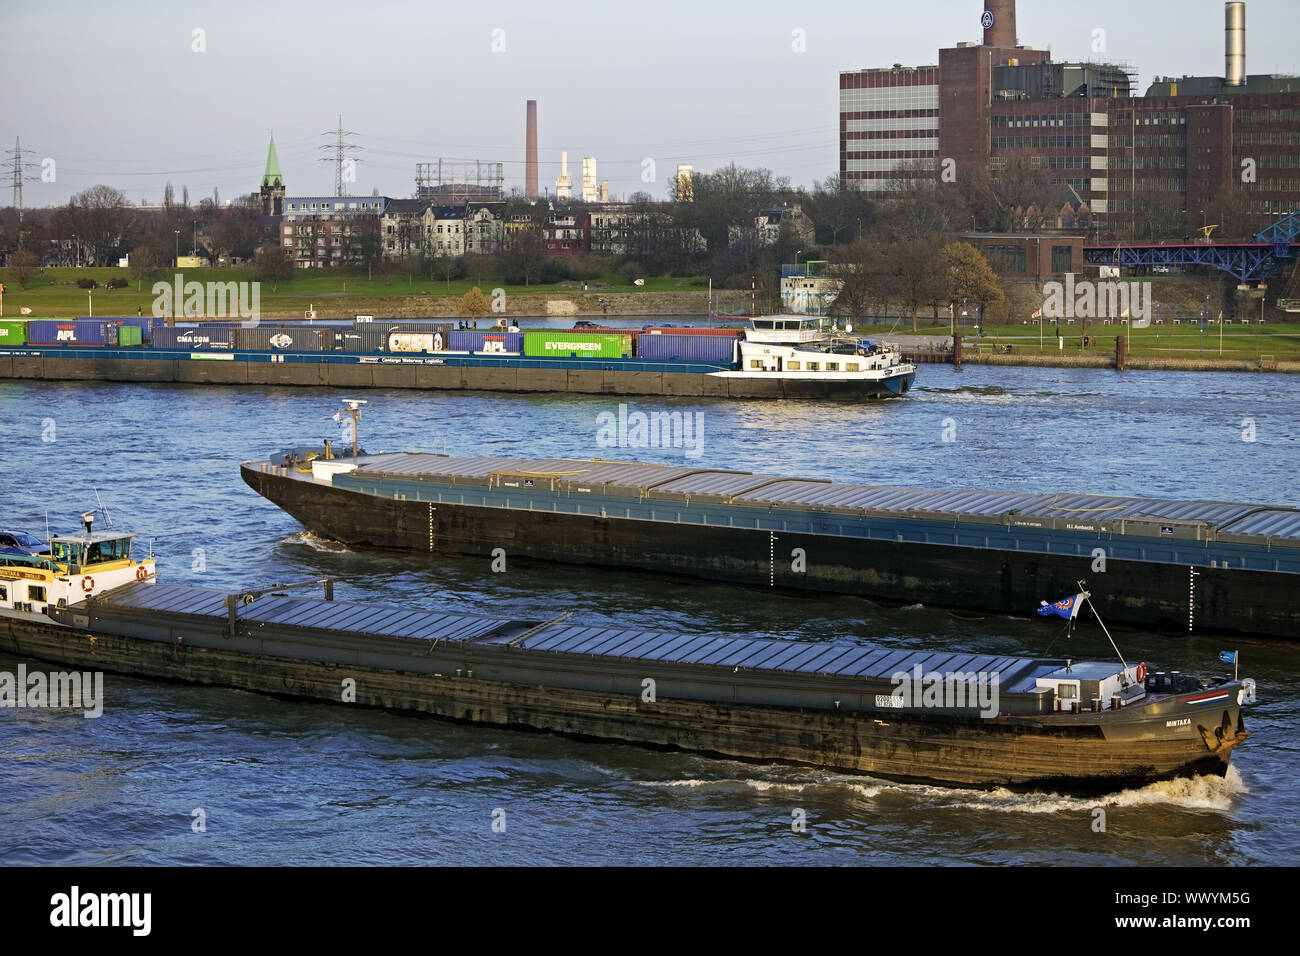 cargo ships on river Rhine and industrial scenery in background, Duisburg, Germany, Europe Stock Photo